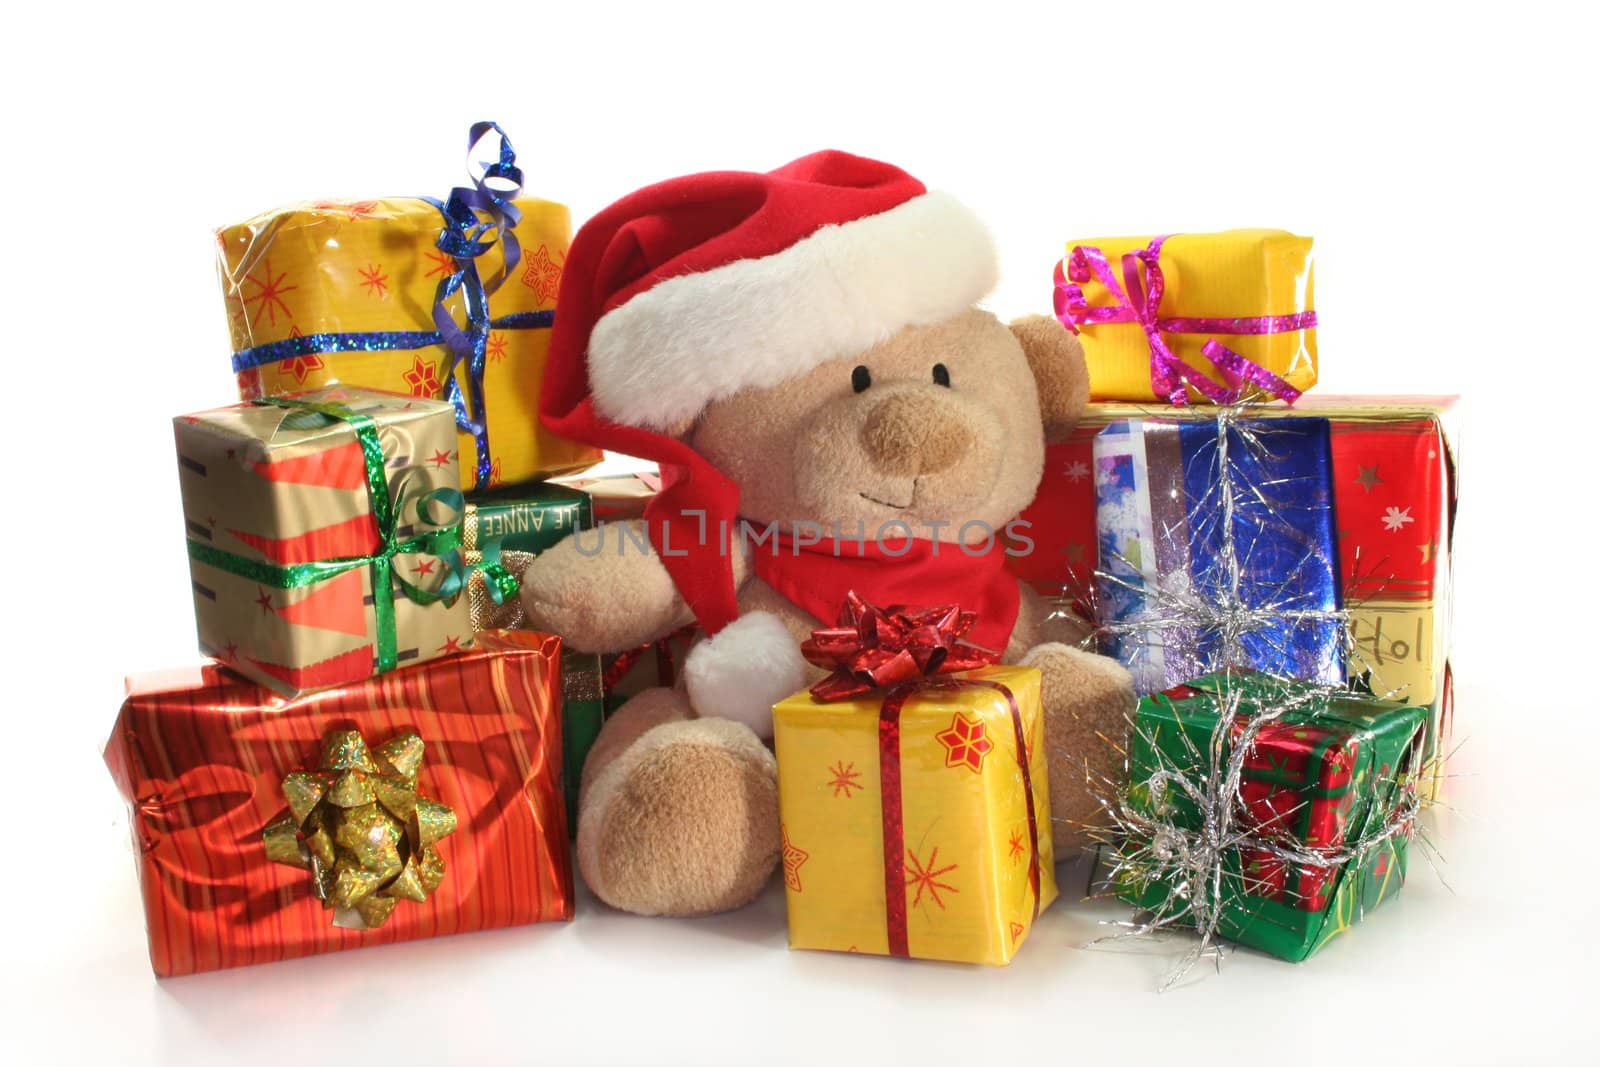 Christmas presents and teddy in front of white background